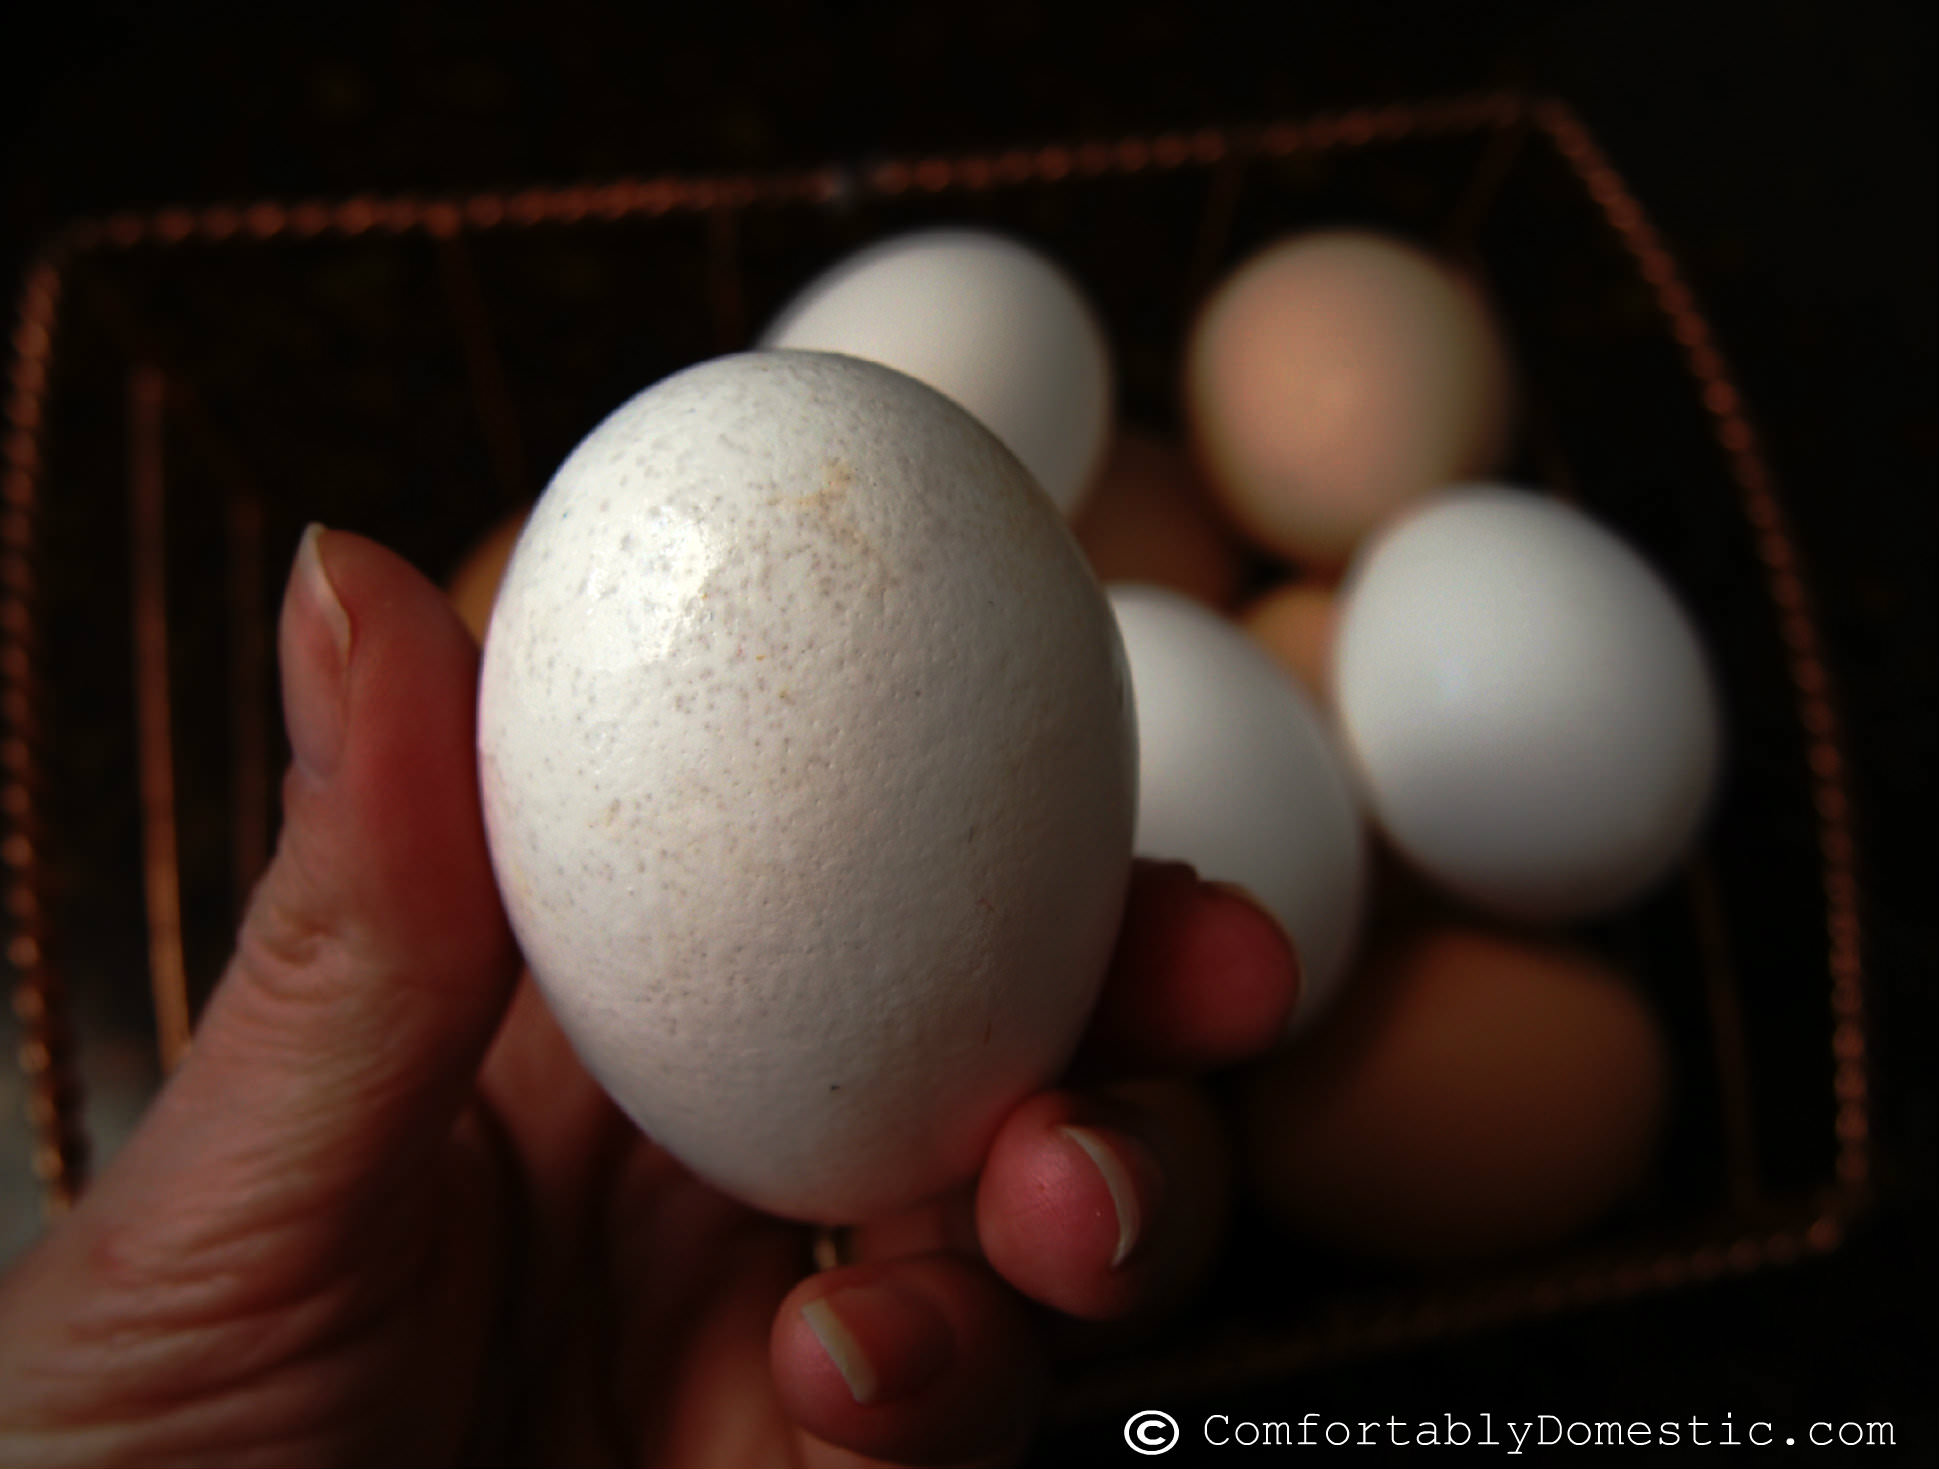 uneven eggshell thickness